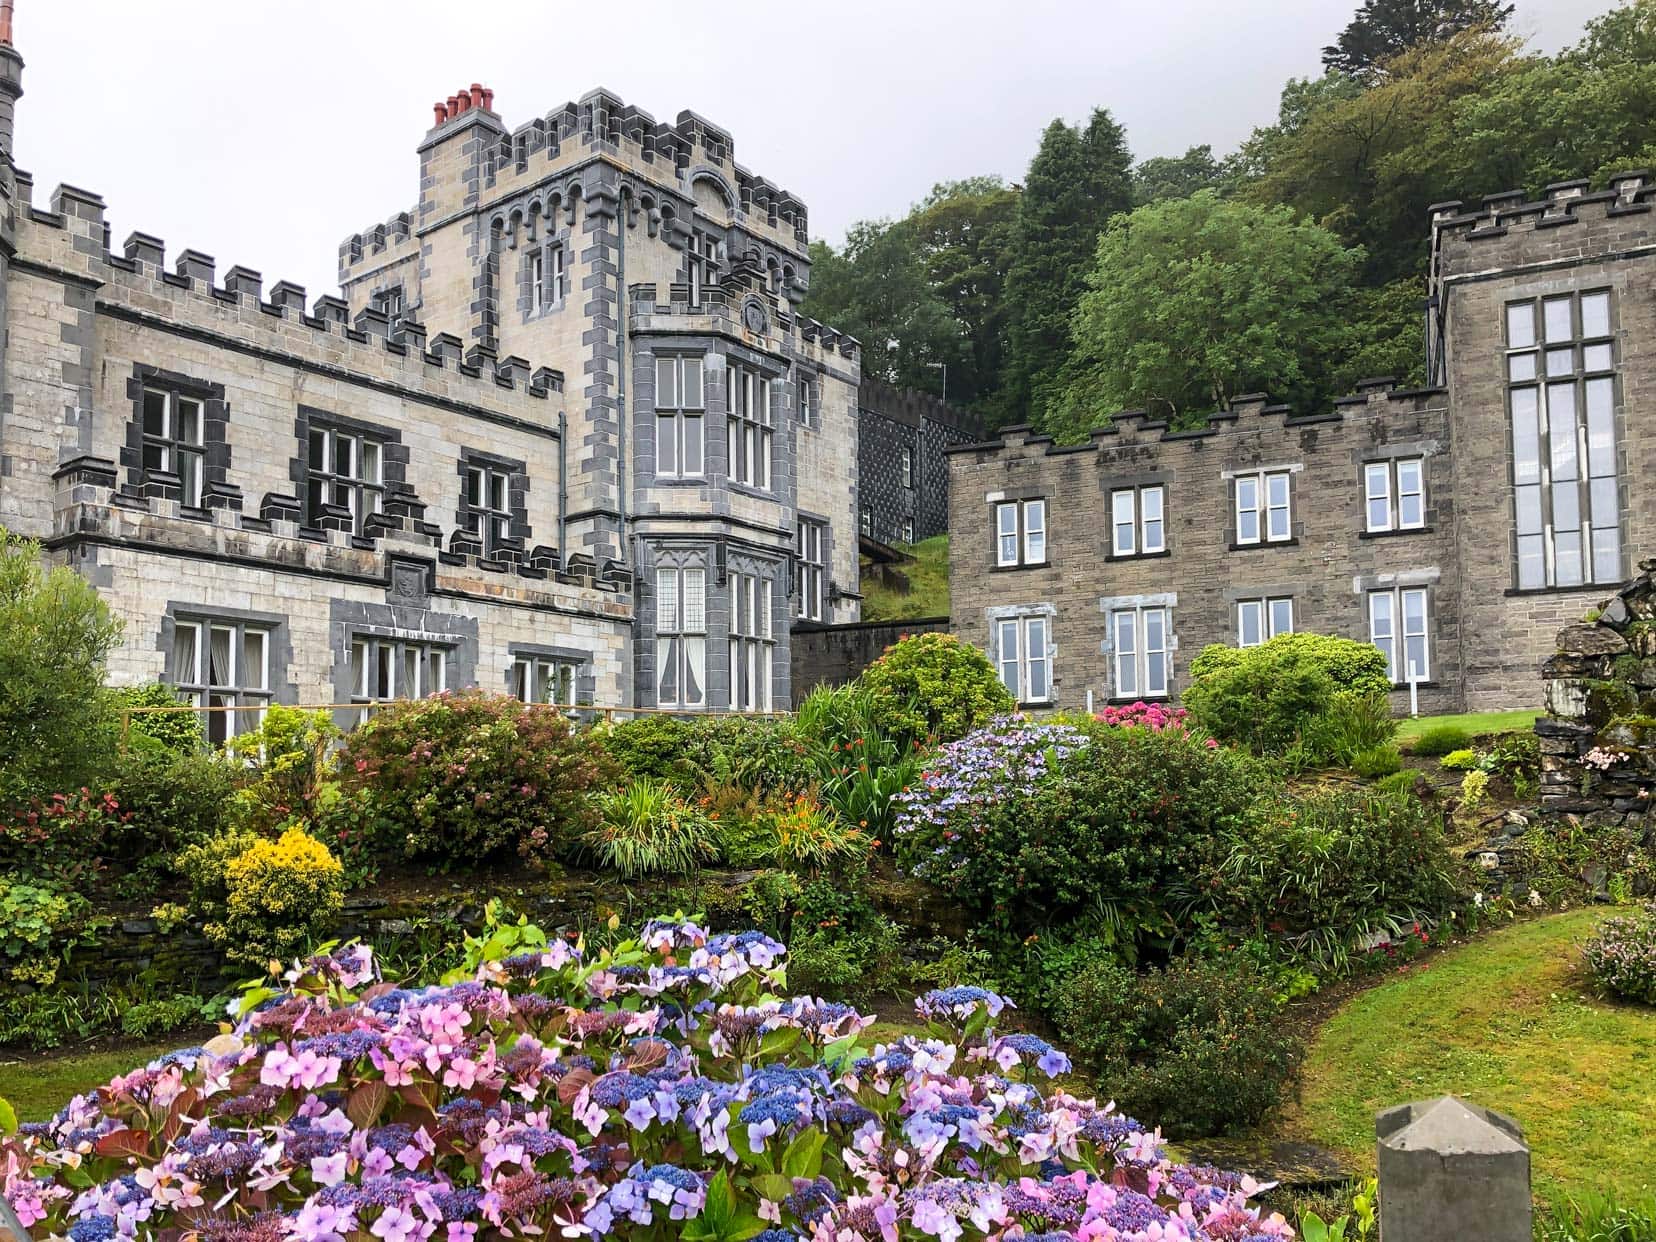 Kylemore-Abbey-building-and-gardens with hydrangeas in the foreground